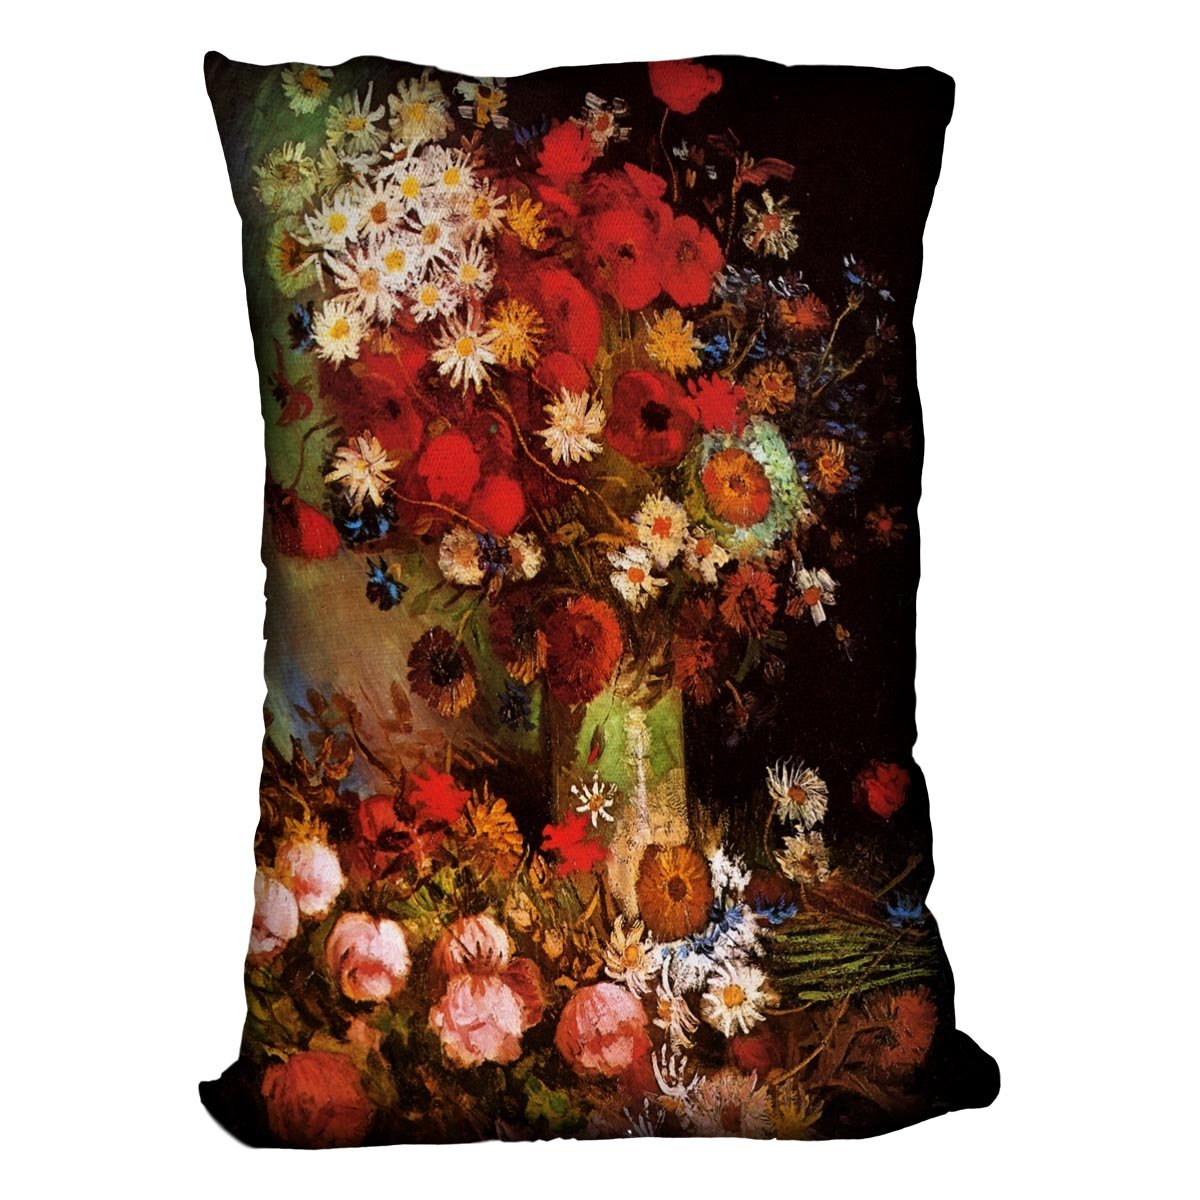 Vase with Poppies Cornflowers Peonies and Chrysanthemums by Van Gogh Throw Pillow